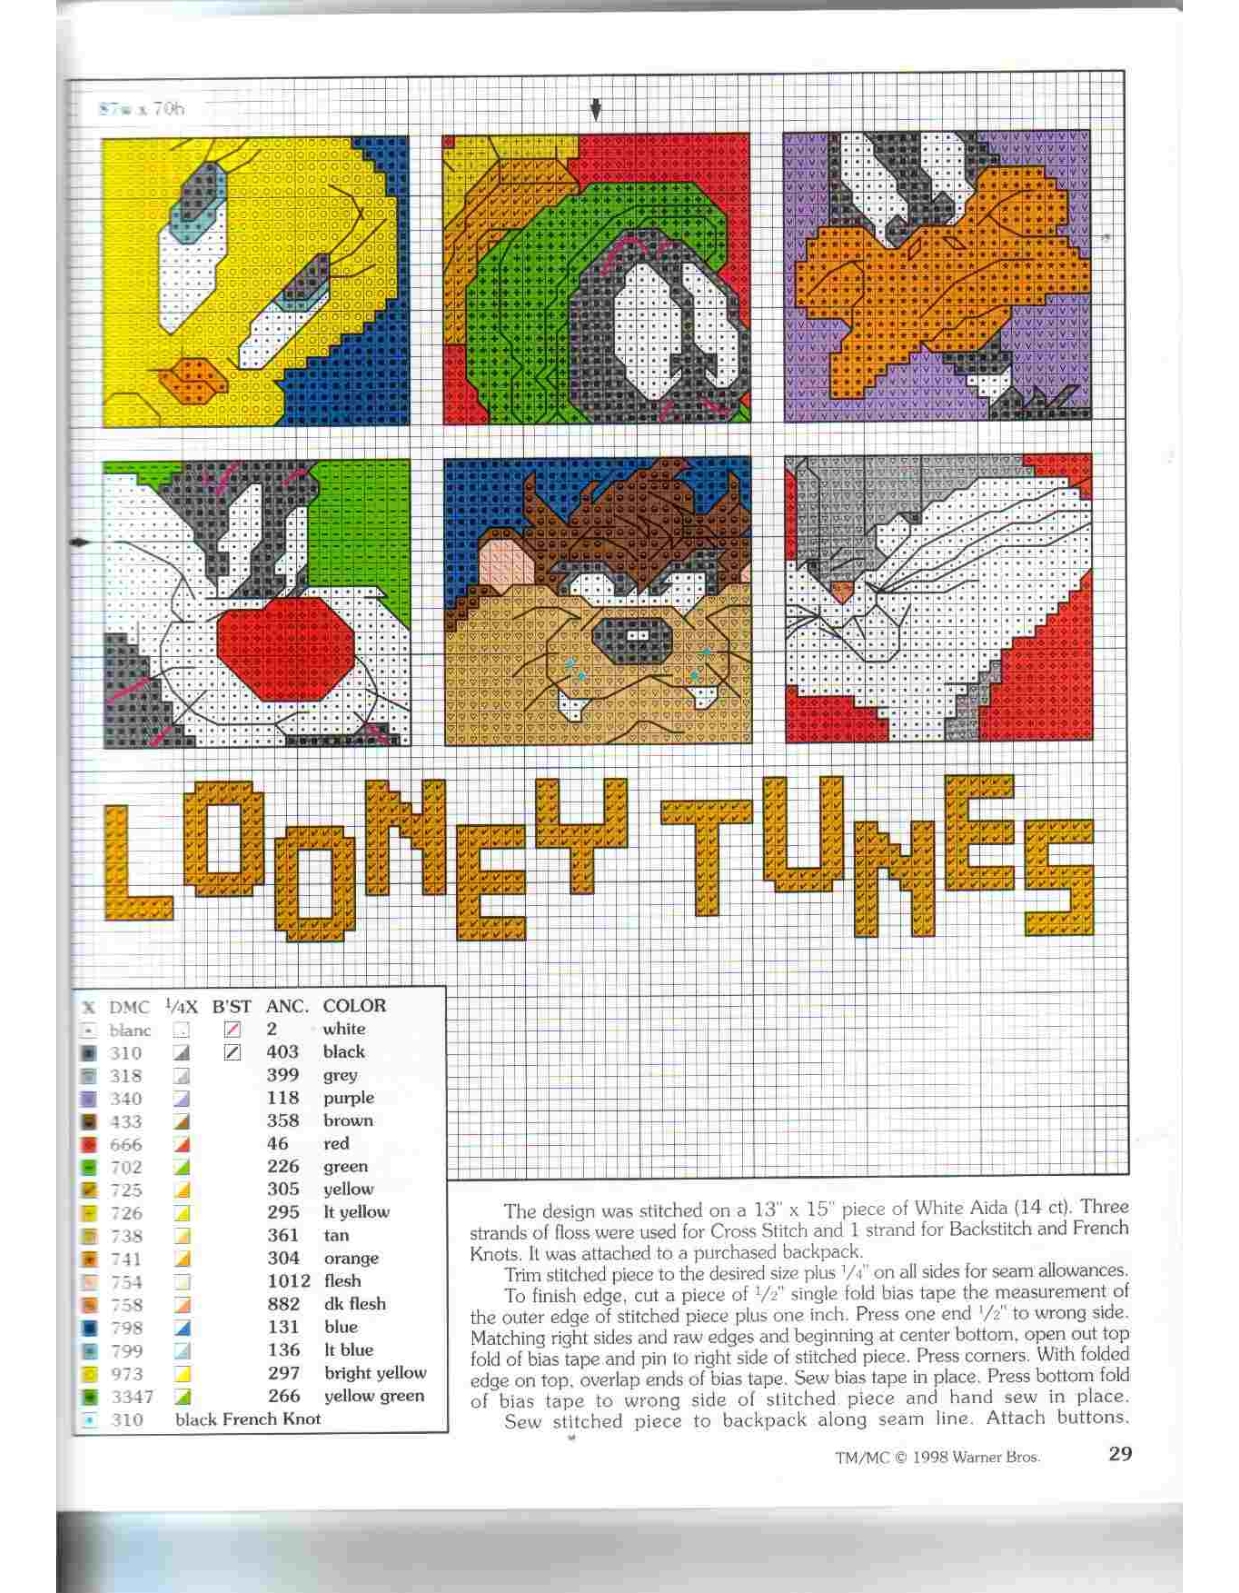 Looney Tunes text with Looney Tunes character faces